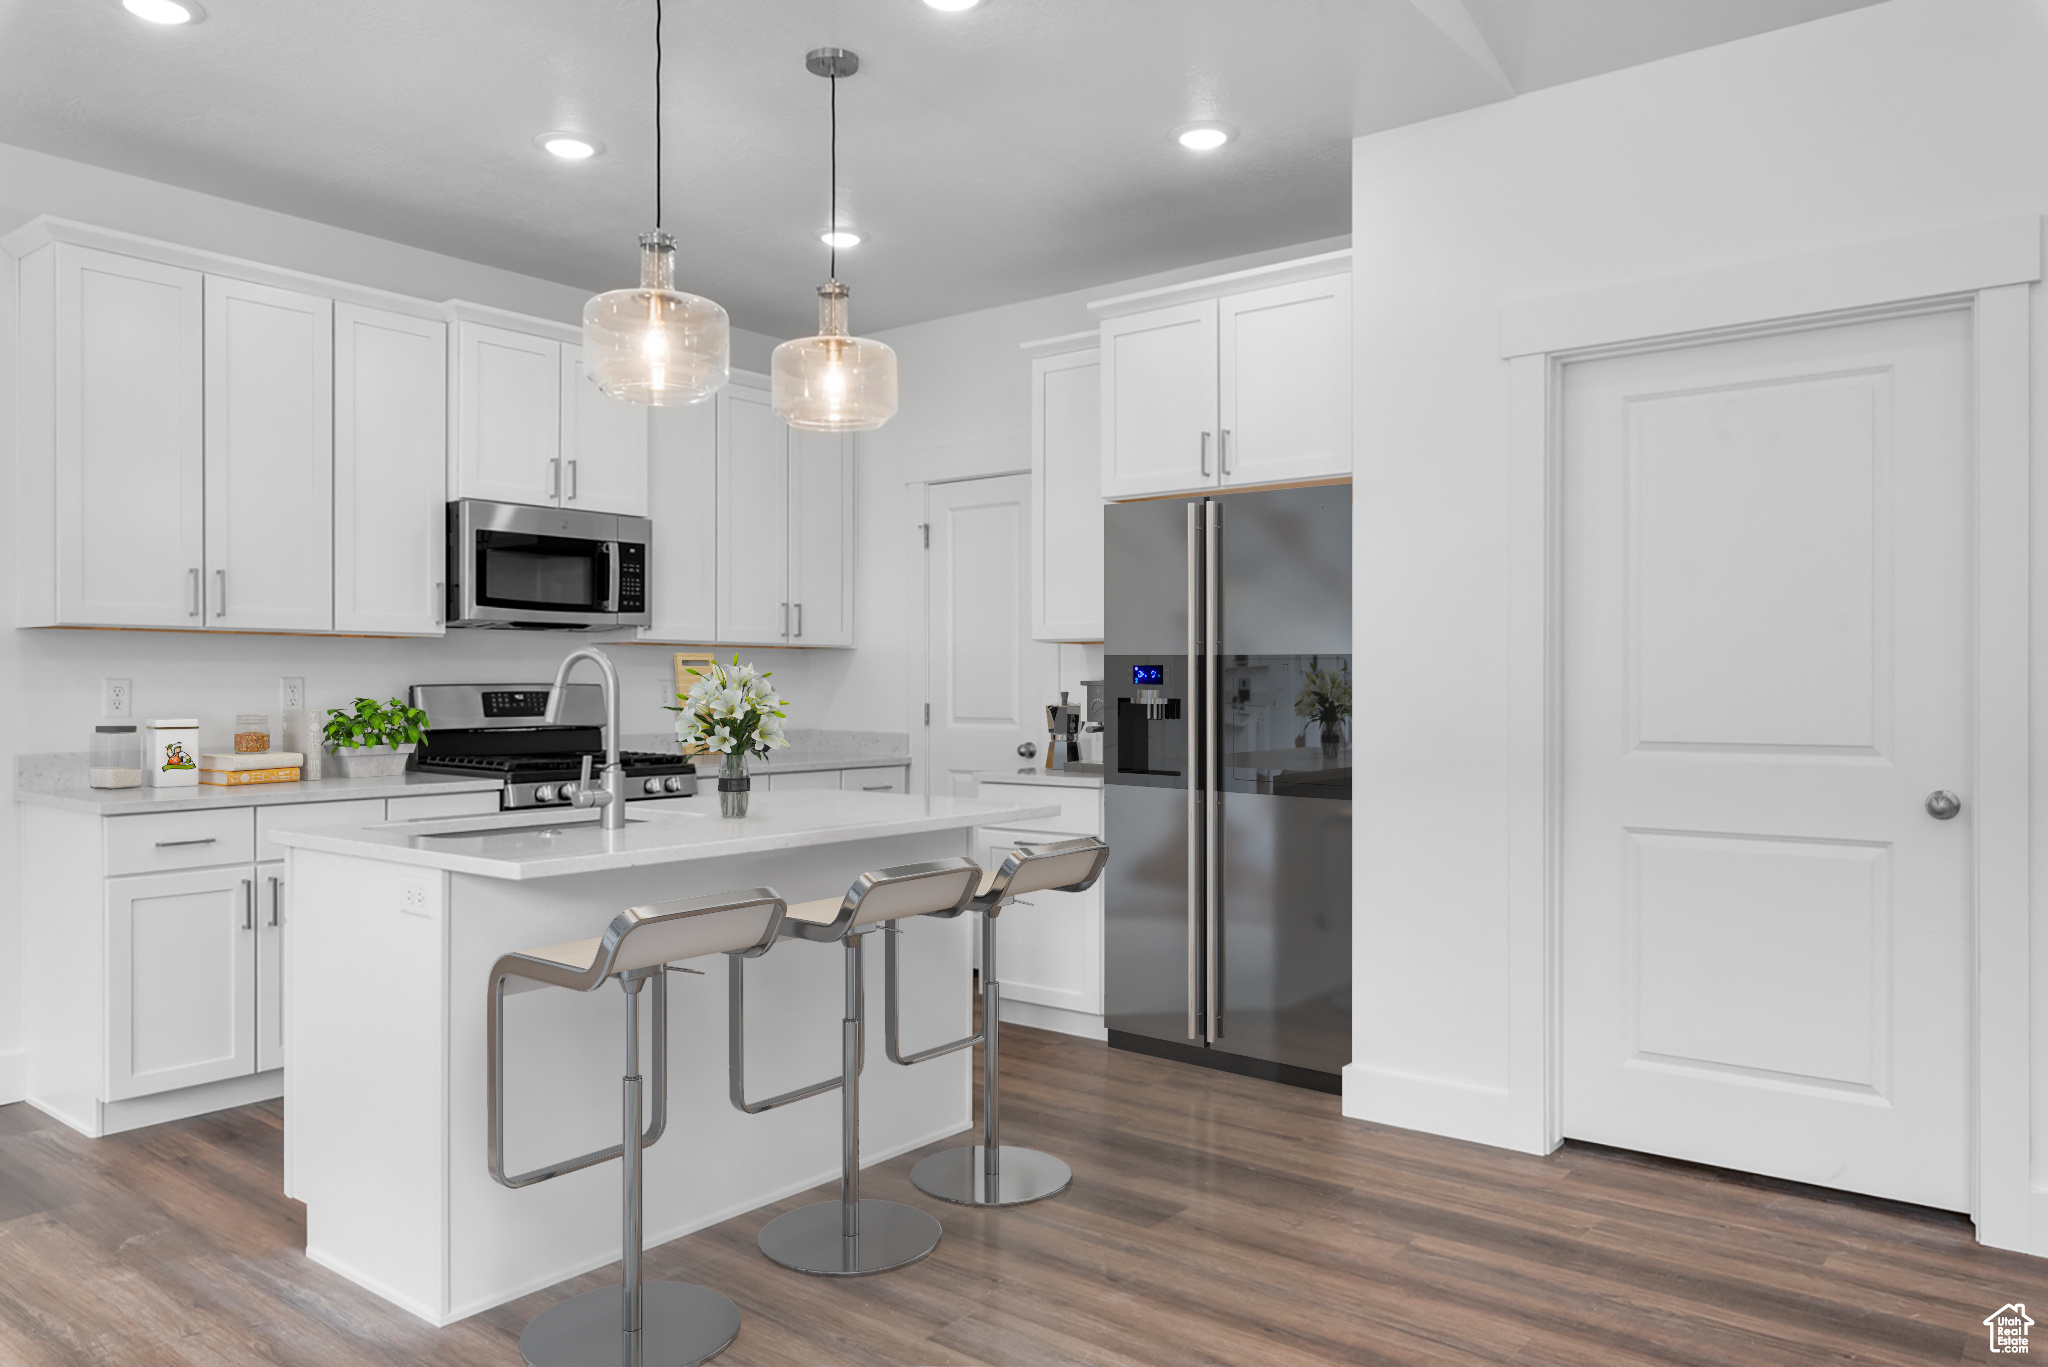 Kitchen with appliances with stainless steel finishes, hanging light fixtures, an island with sink, and dark hardwood / wood-style flooring